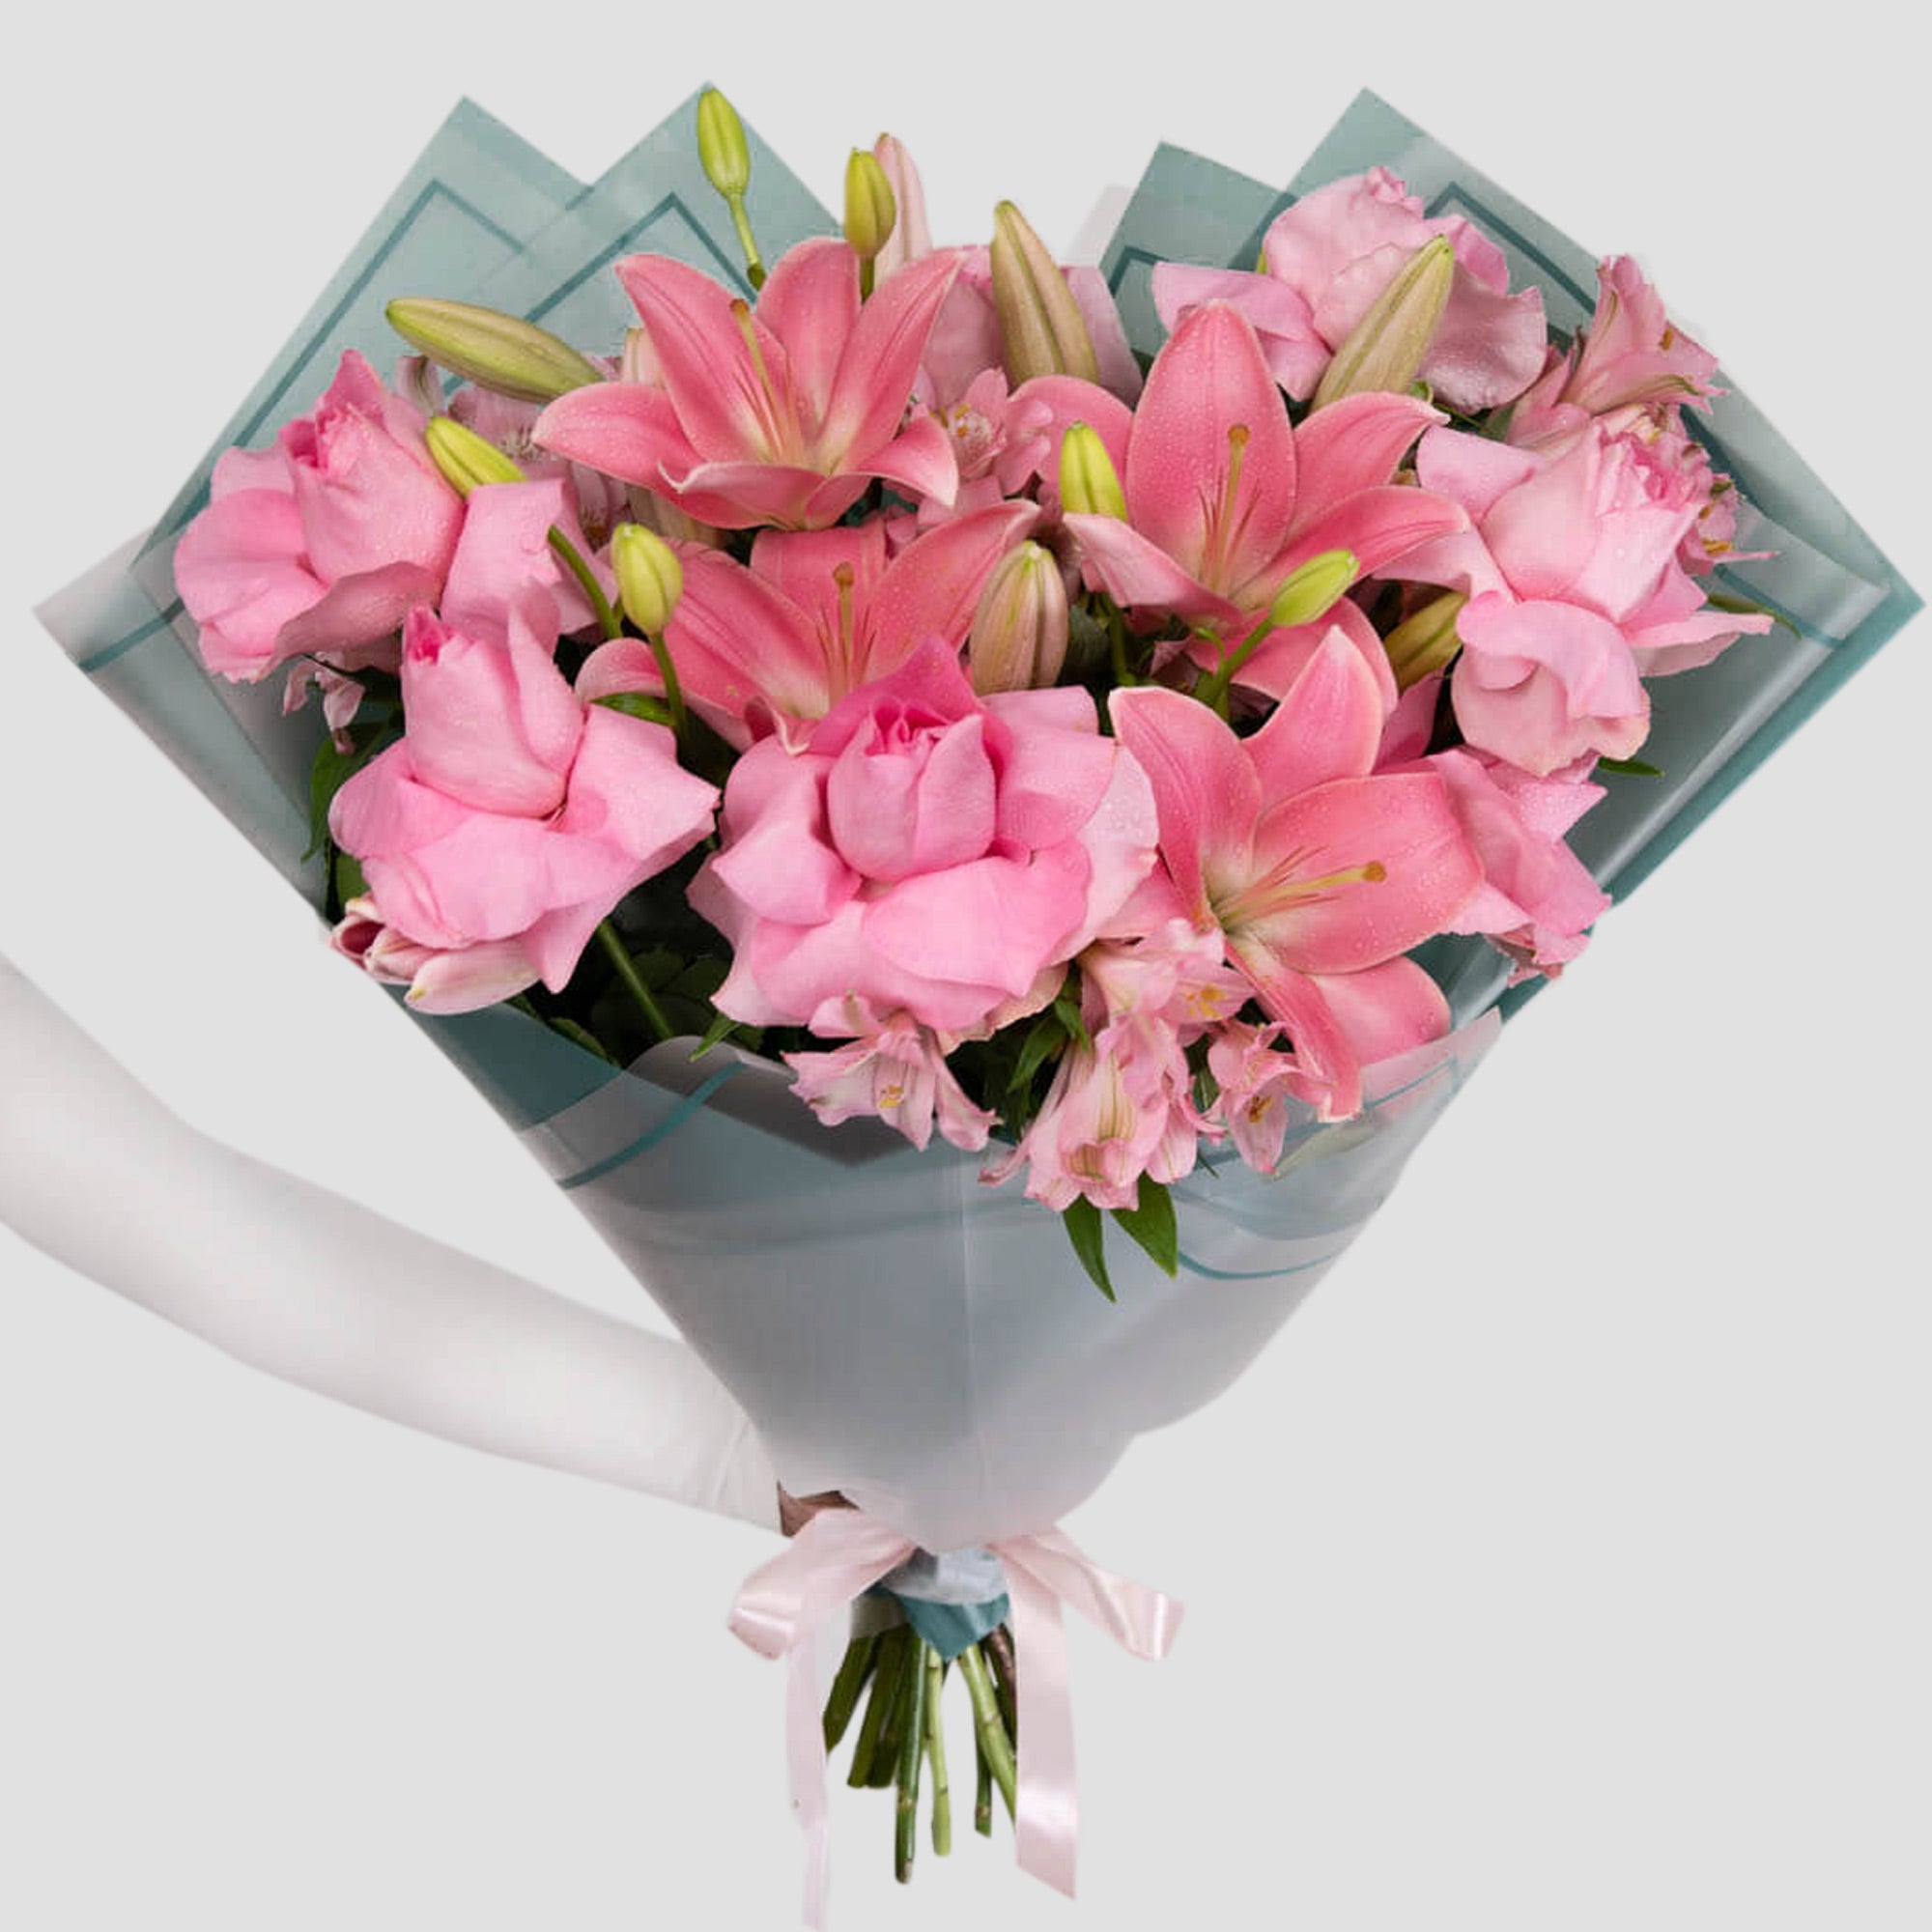 Bouquet with lilies and pink roses